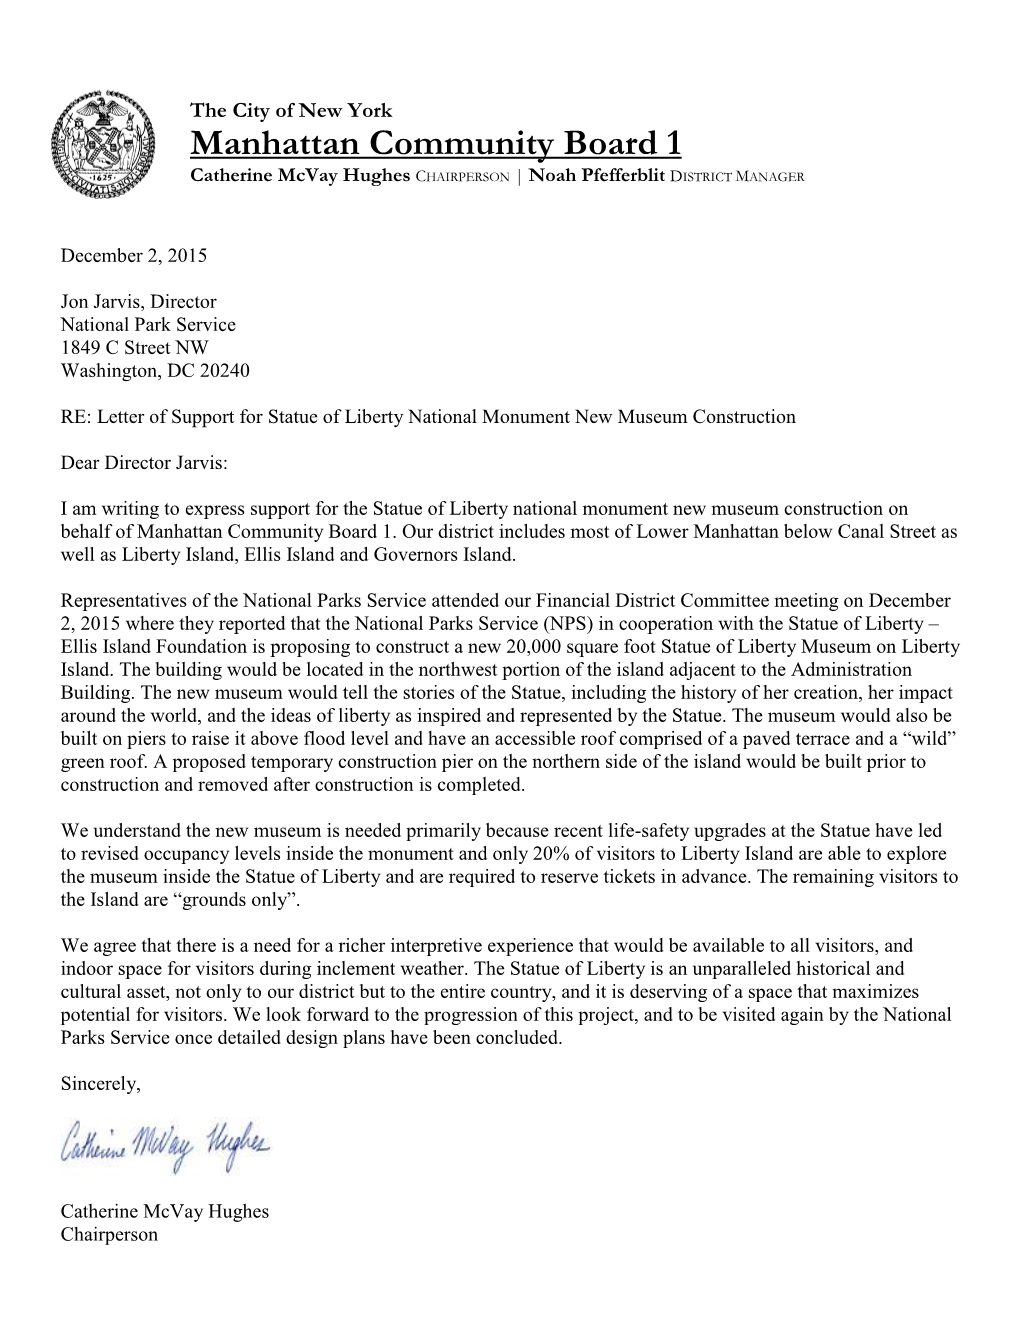 Letter of Support for Statue of Liberty National Monument New Museum Construction